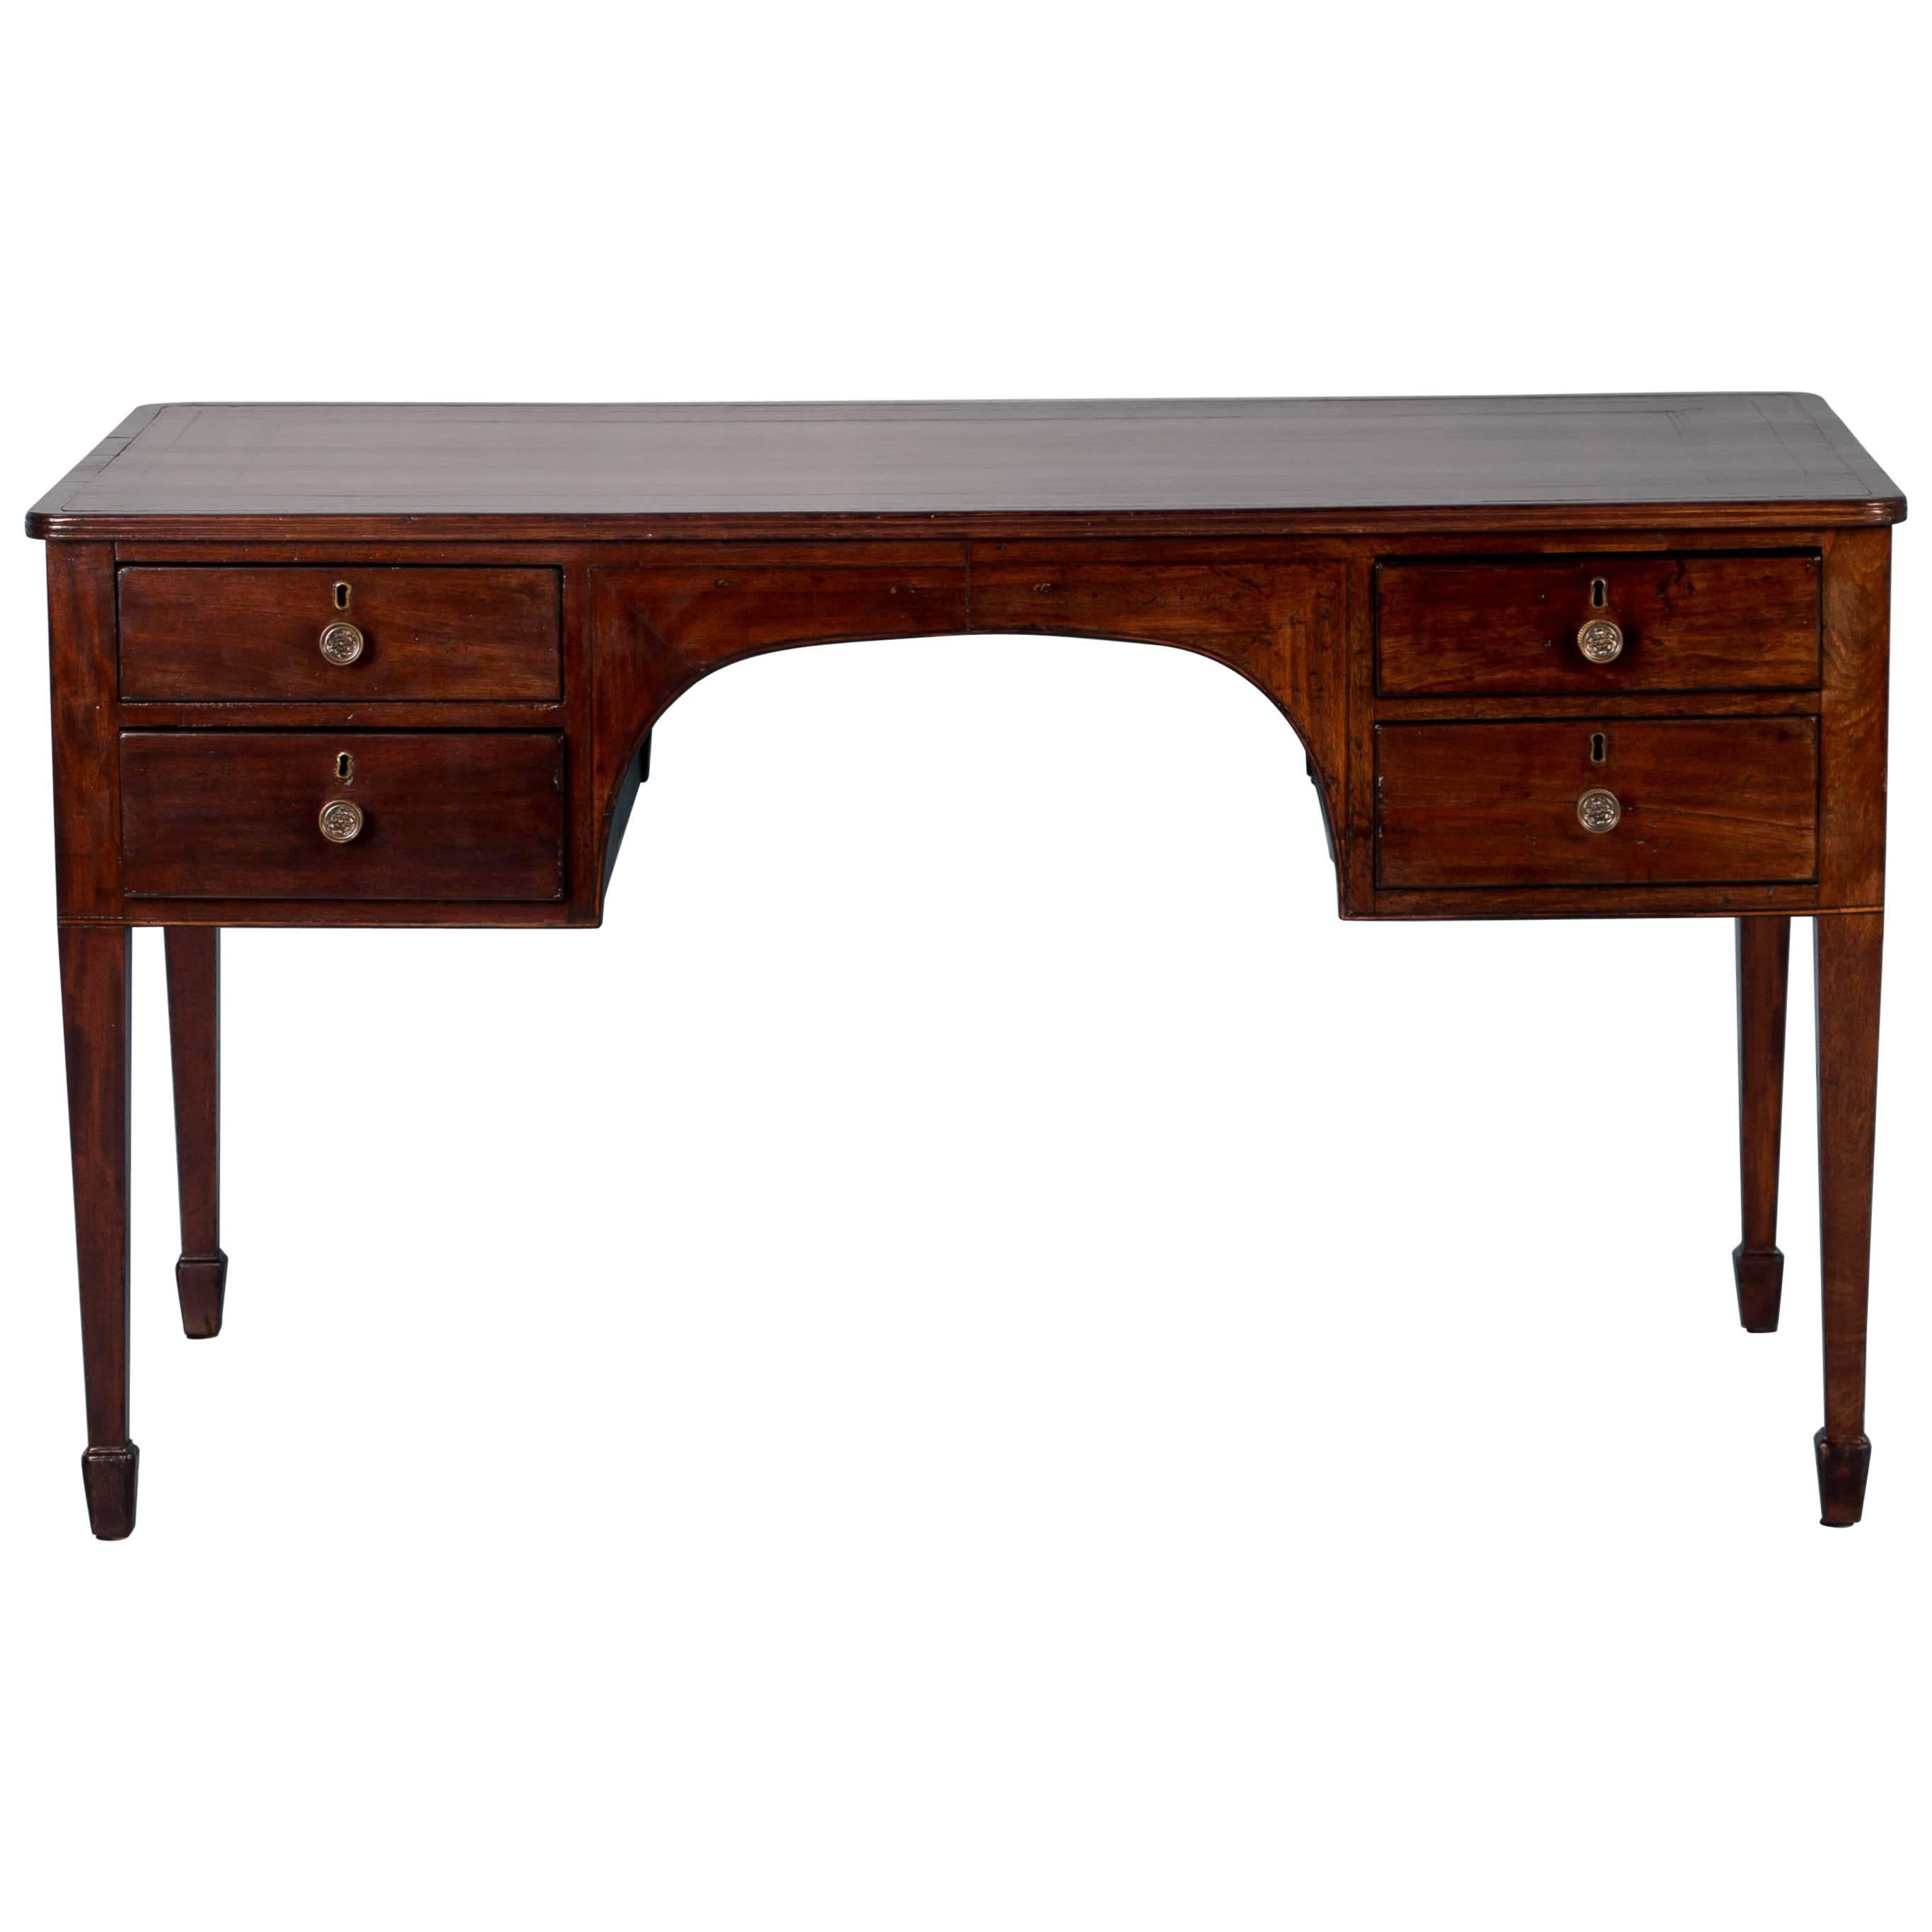 The solid dark mahogany glows on this antique desk from England that features the original time worn green leather top with a hand tooled gold border. There are four working drawers on one side and four imitation drawers on the other with the